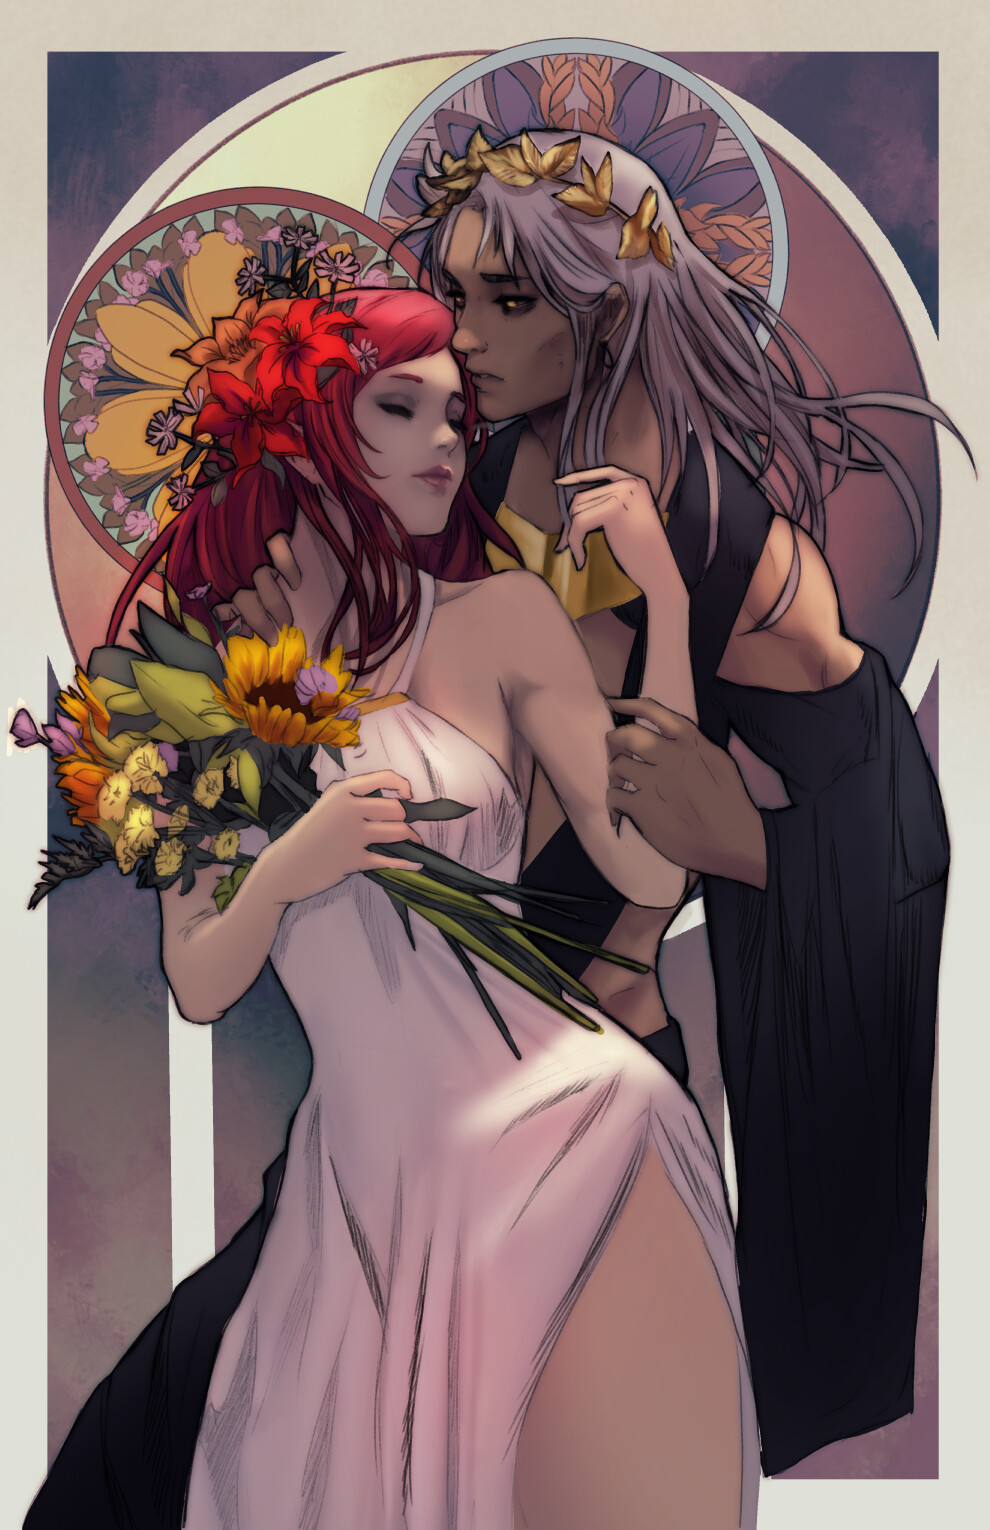 Hades and Persephone.